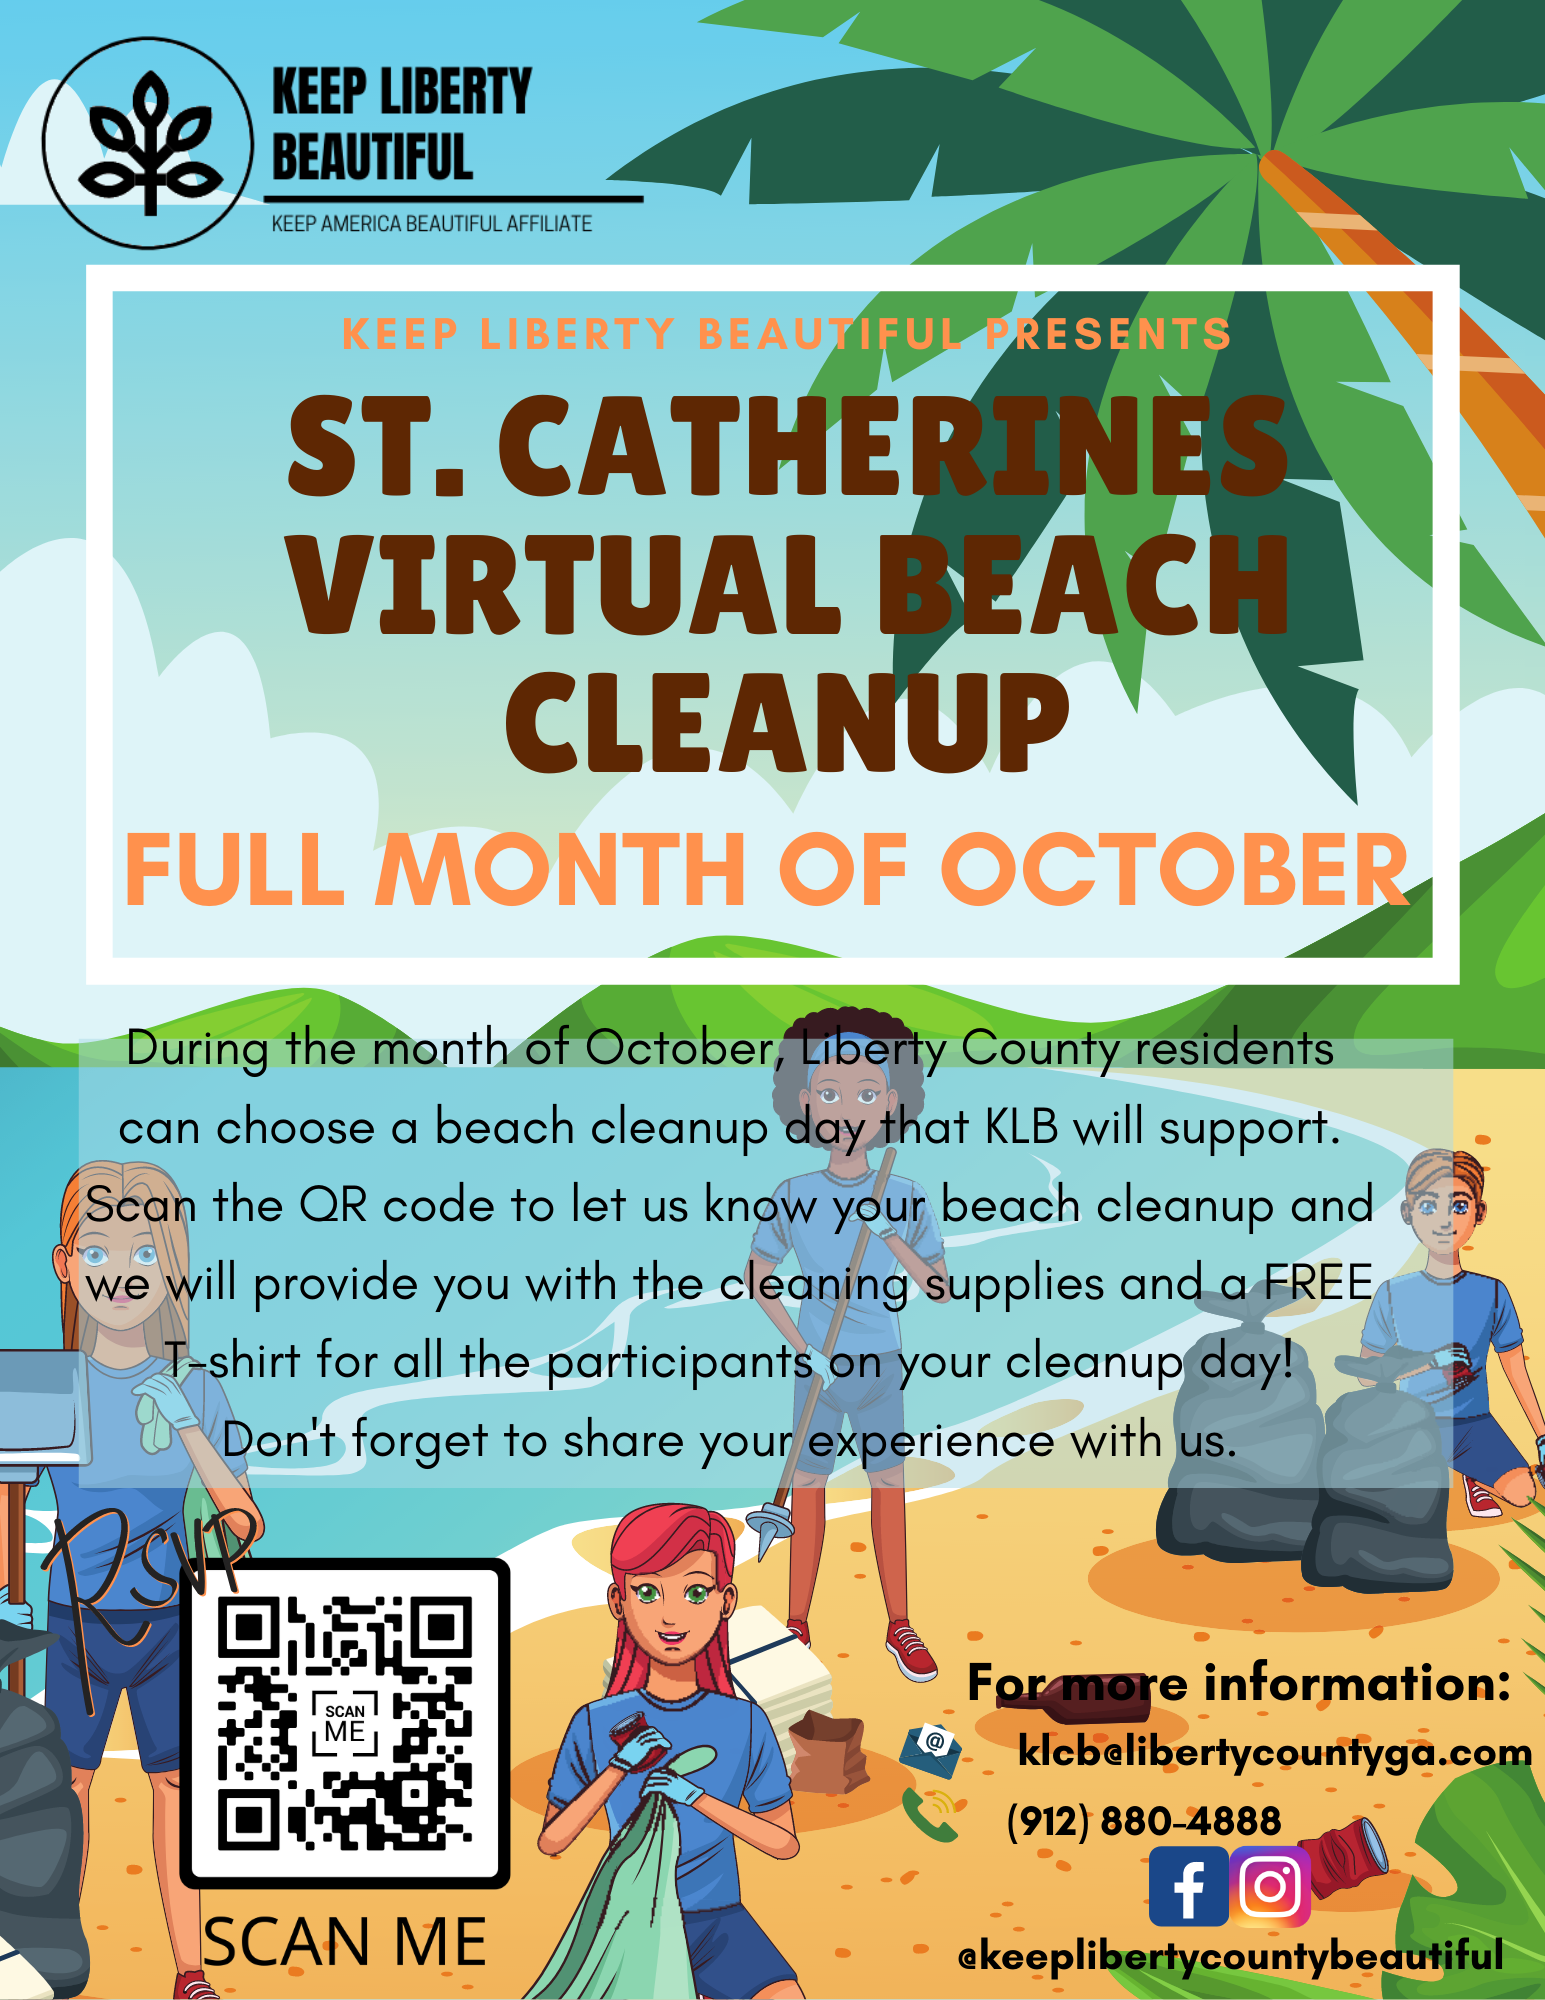 St. Catherines Virtual Beach Cleanup